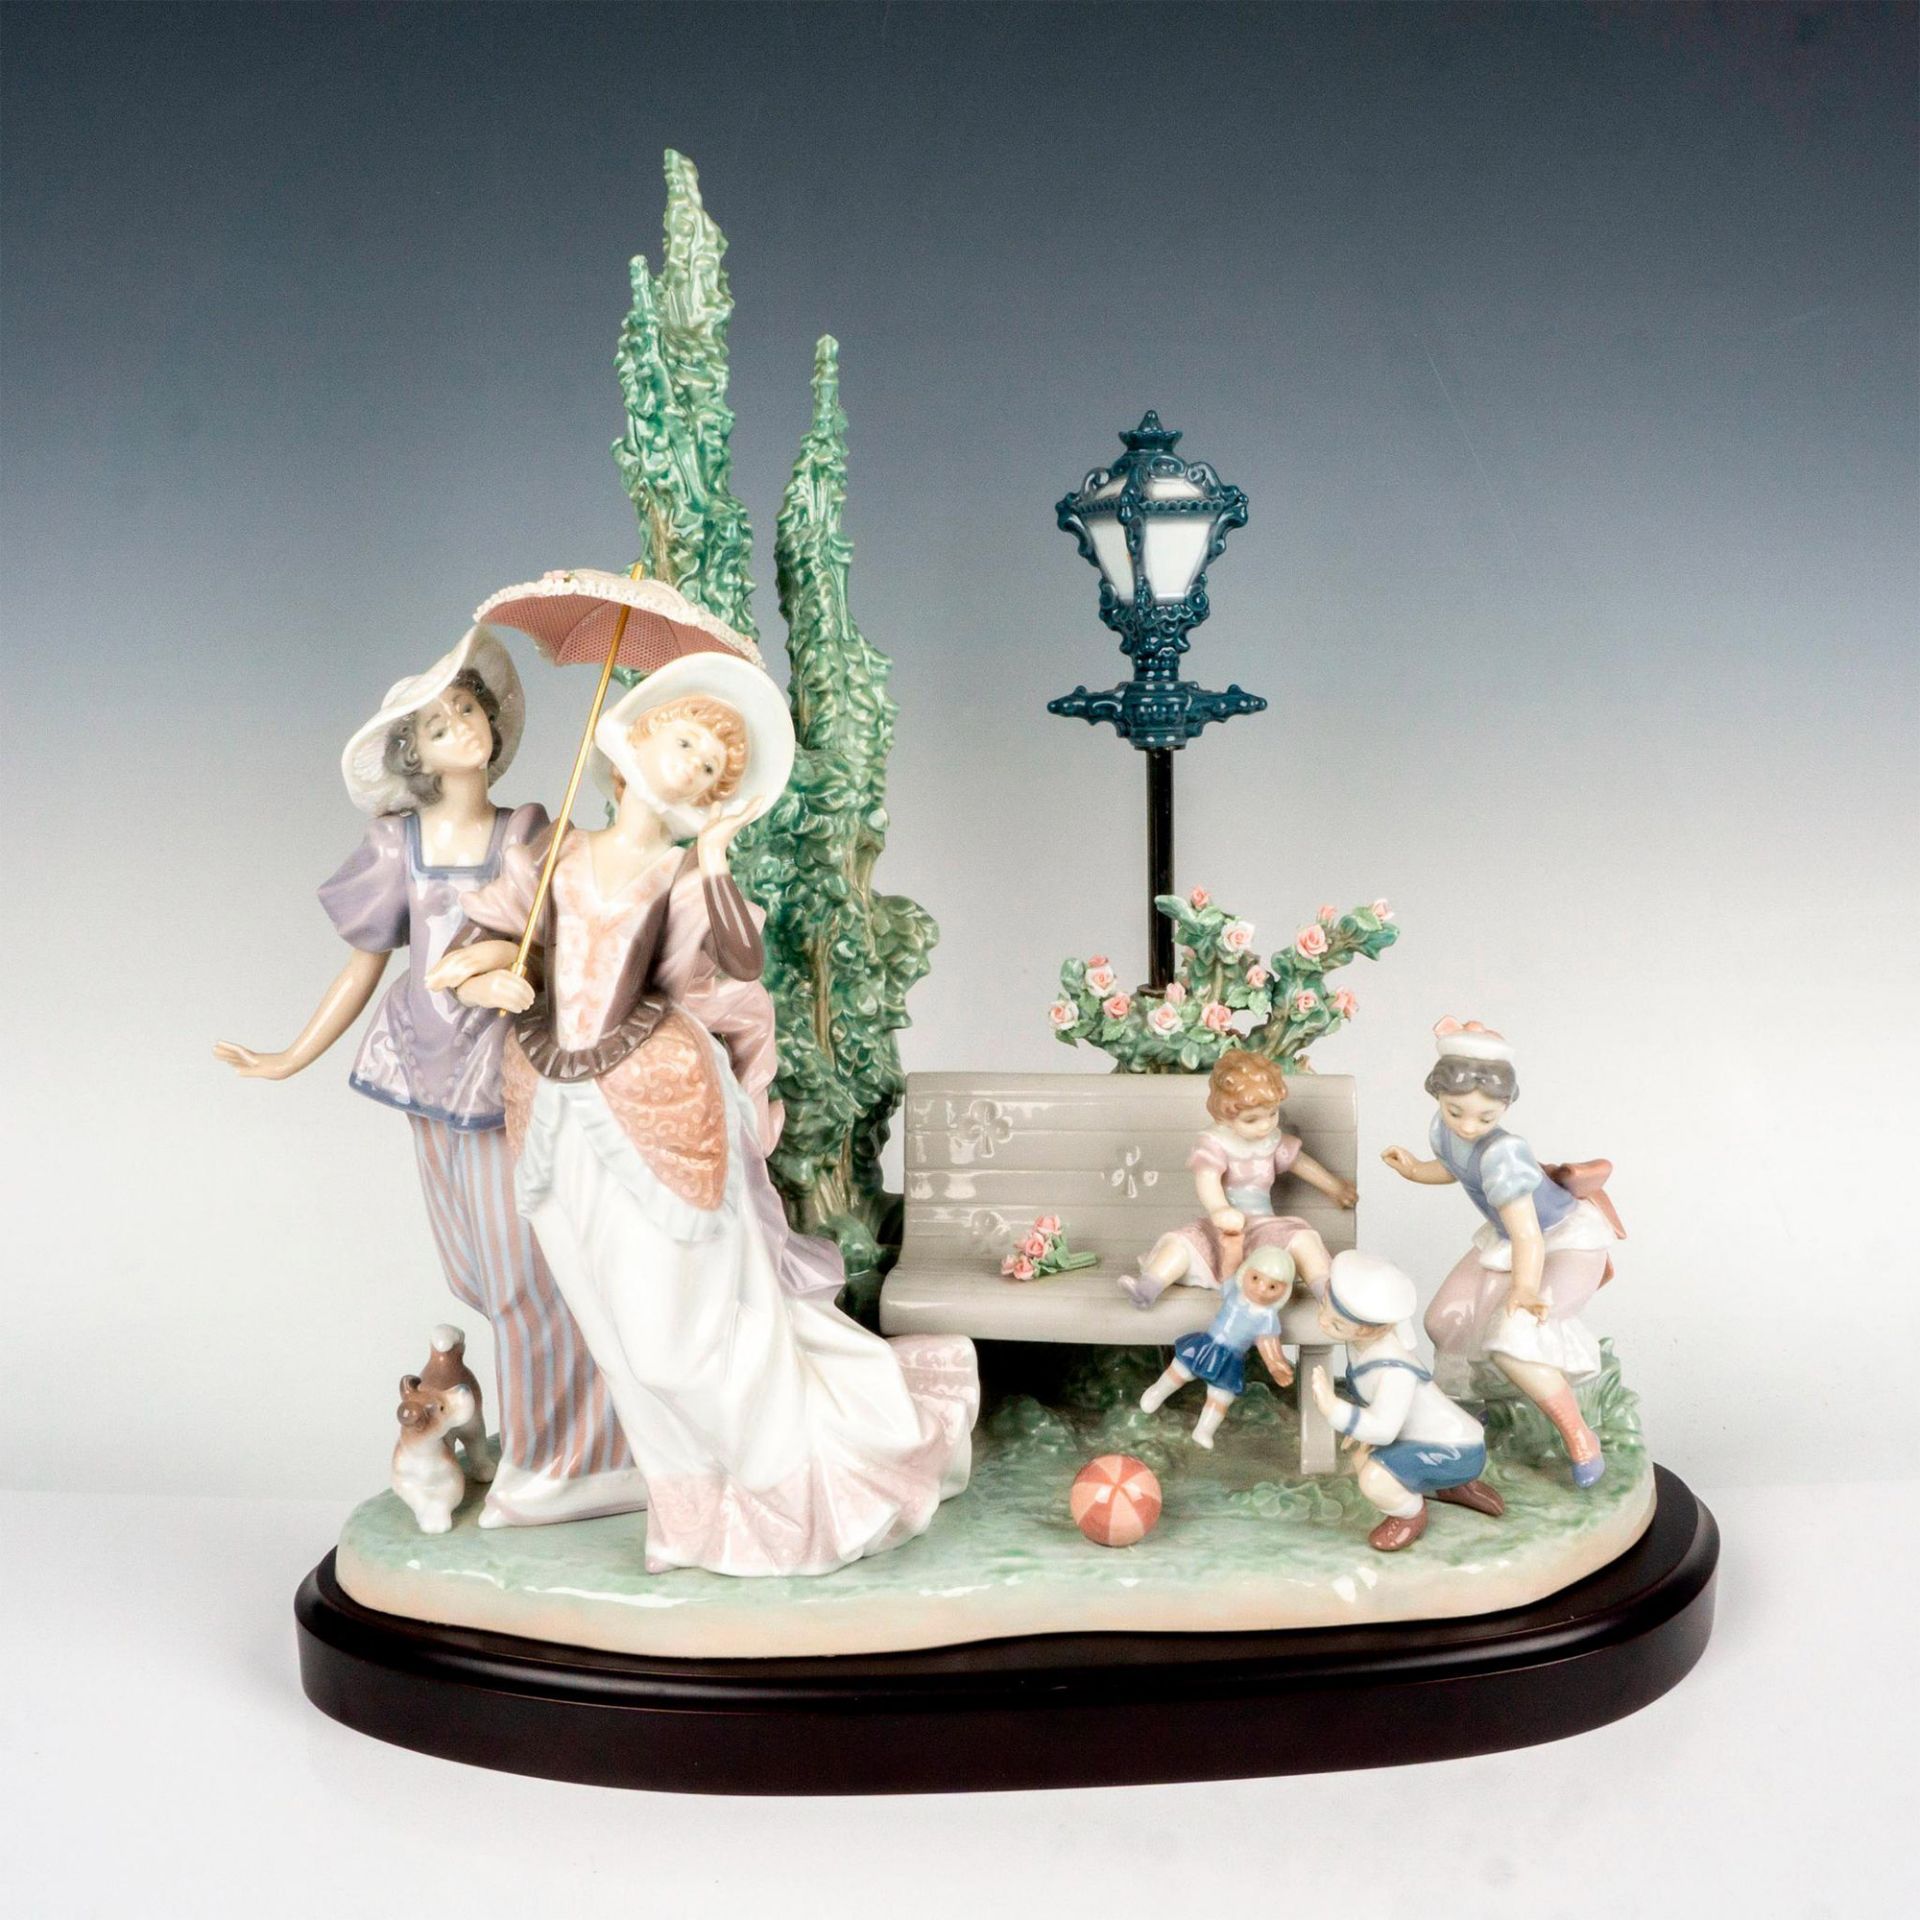 A Stroll in the Park 1001519, Signed - Lladro Figurine + Base